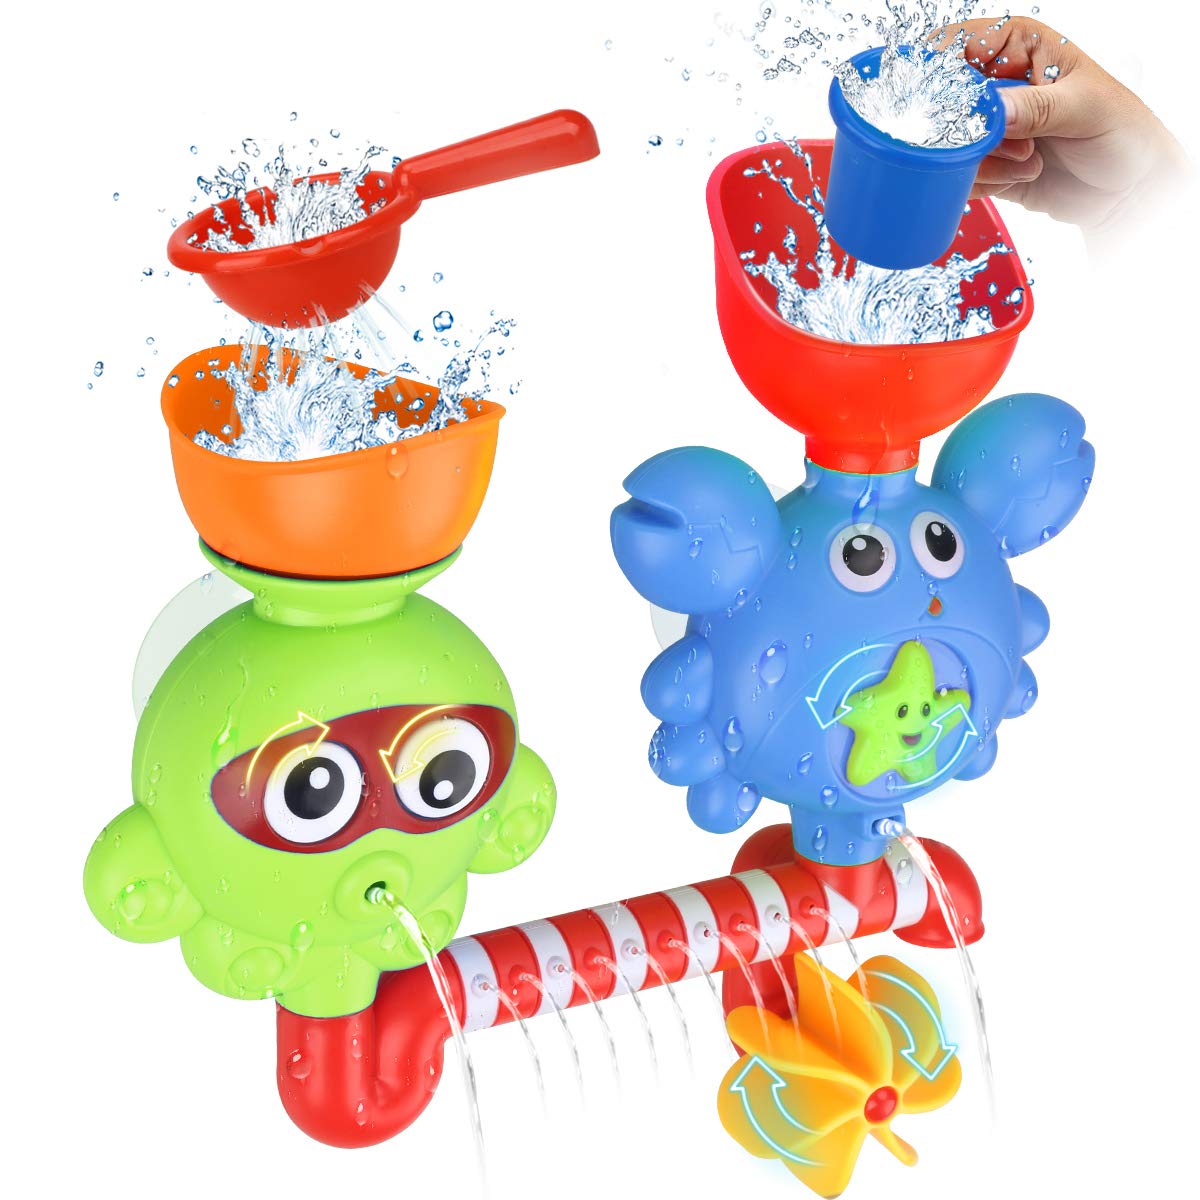 GOODLOGO Bath Toys Bathtub Toys for 1 2 3 4 Year Old Kids Toddlers Bath Wall Toy Waterfall Fill Spin and Flow Non Toxic Birthday Gift Ideas Color Box (Multicolor)